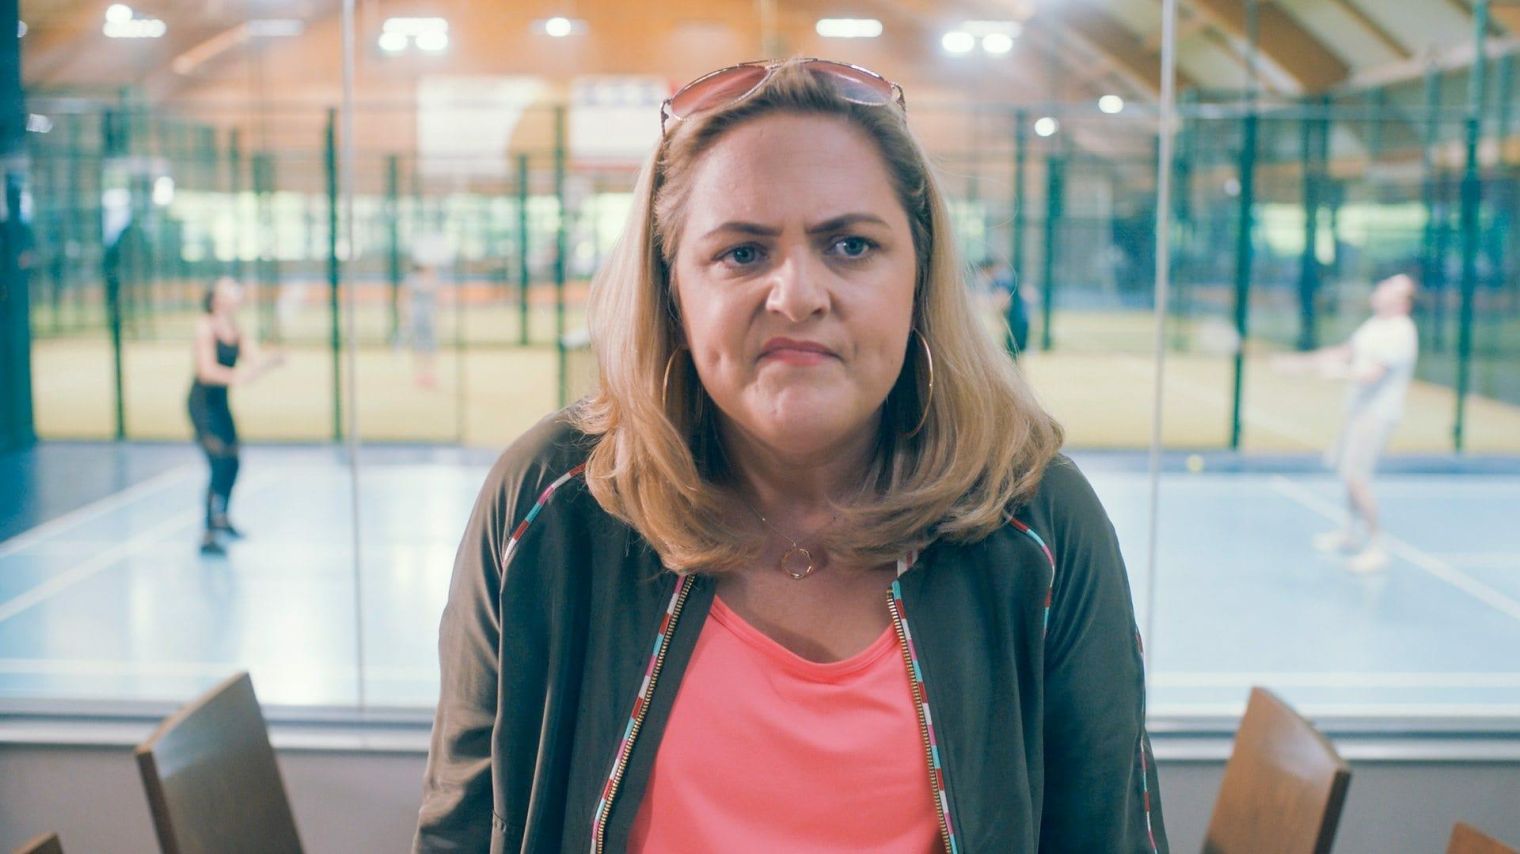 Laura Checkley is nominated for Channel 4's inaugural National Comedy Awards for her hilarious depiction of Terri in 'King Gary'.